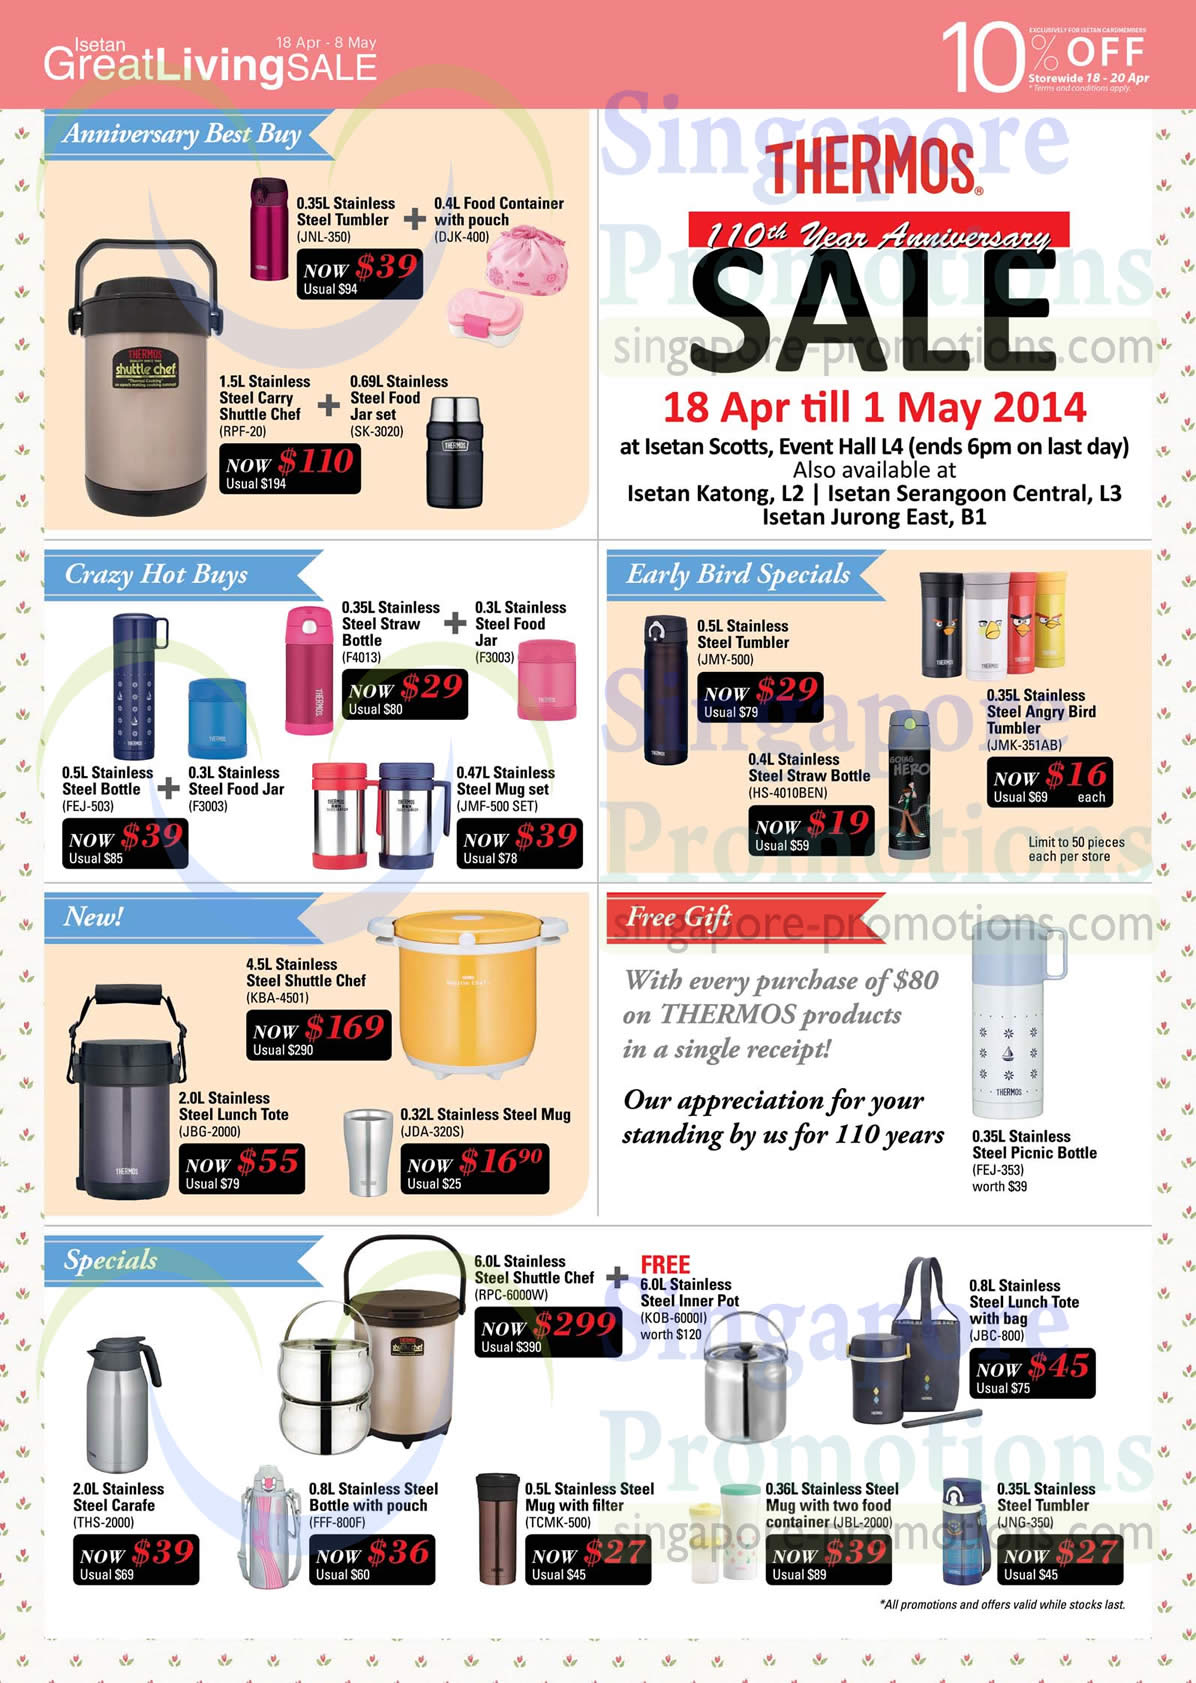 Thermos Sale Anniversary Best Buy, Early Bird Specials, Free Gift